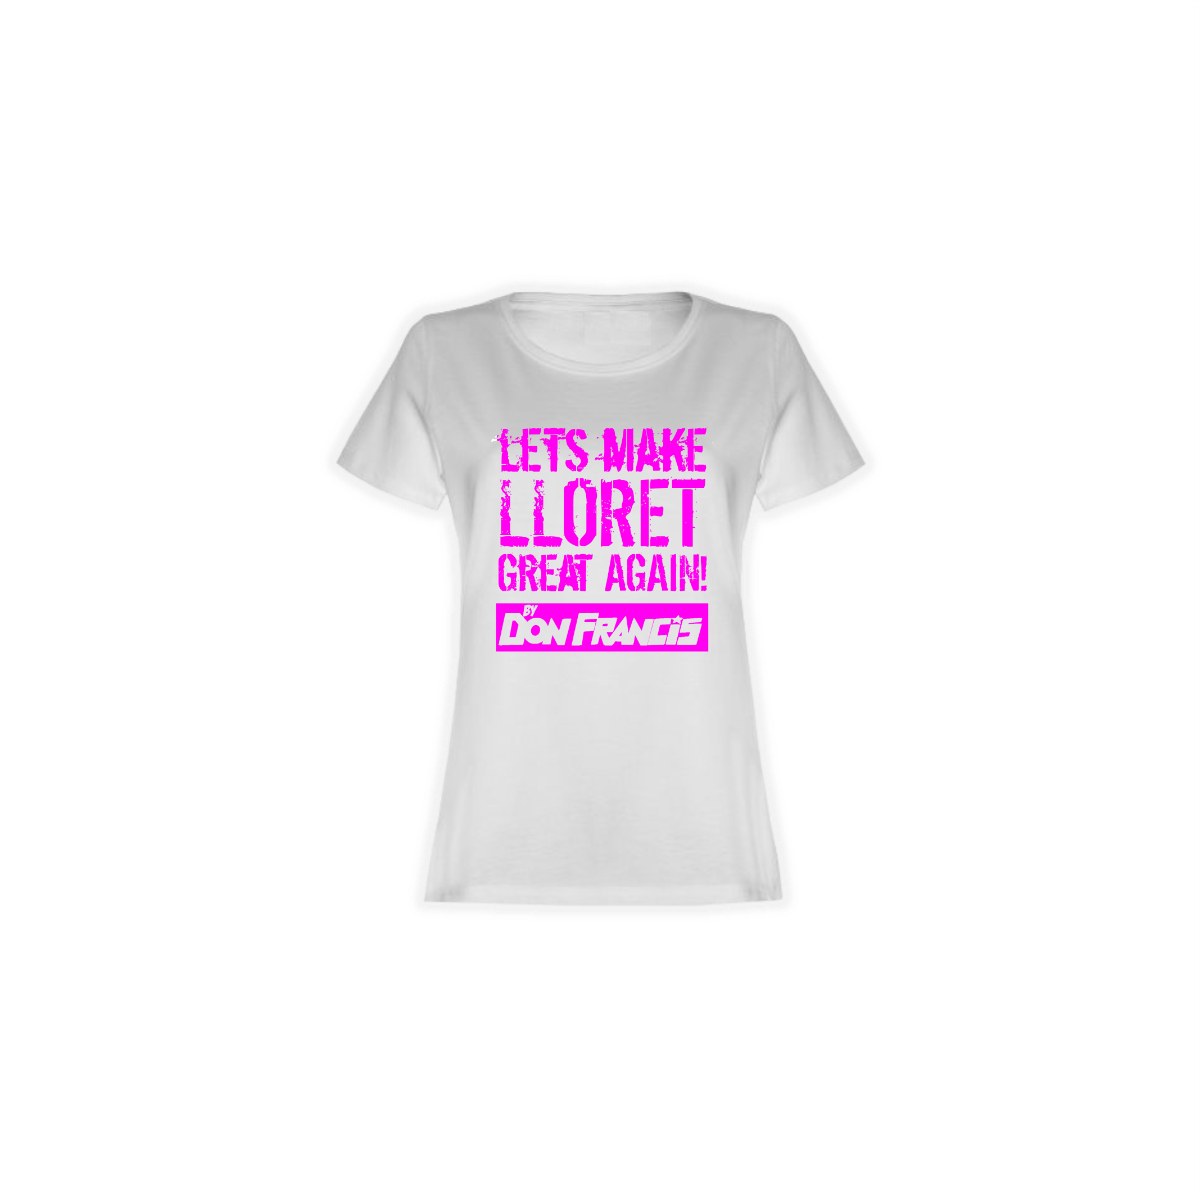 Girly-Shirt "LET'S MAKE LLORET GREAT AGAIN" weiß